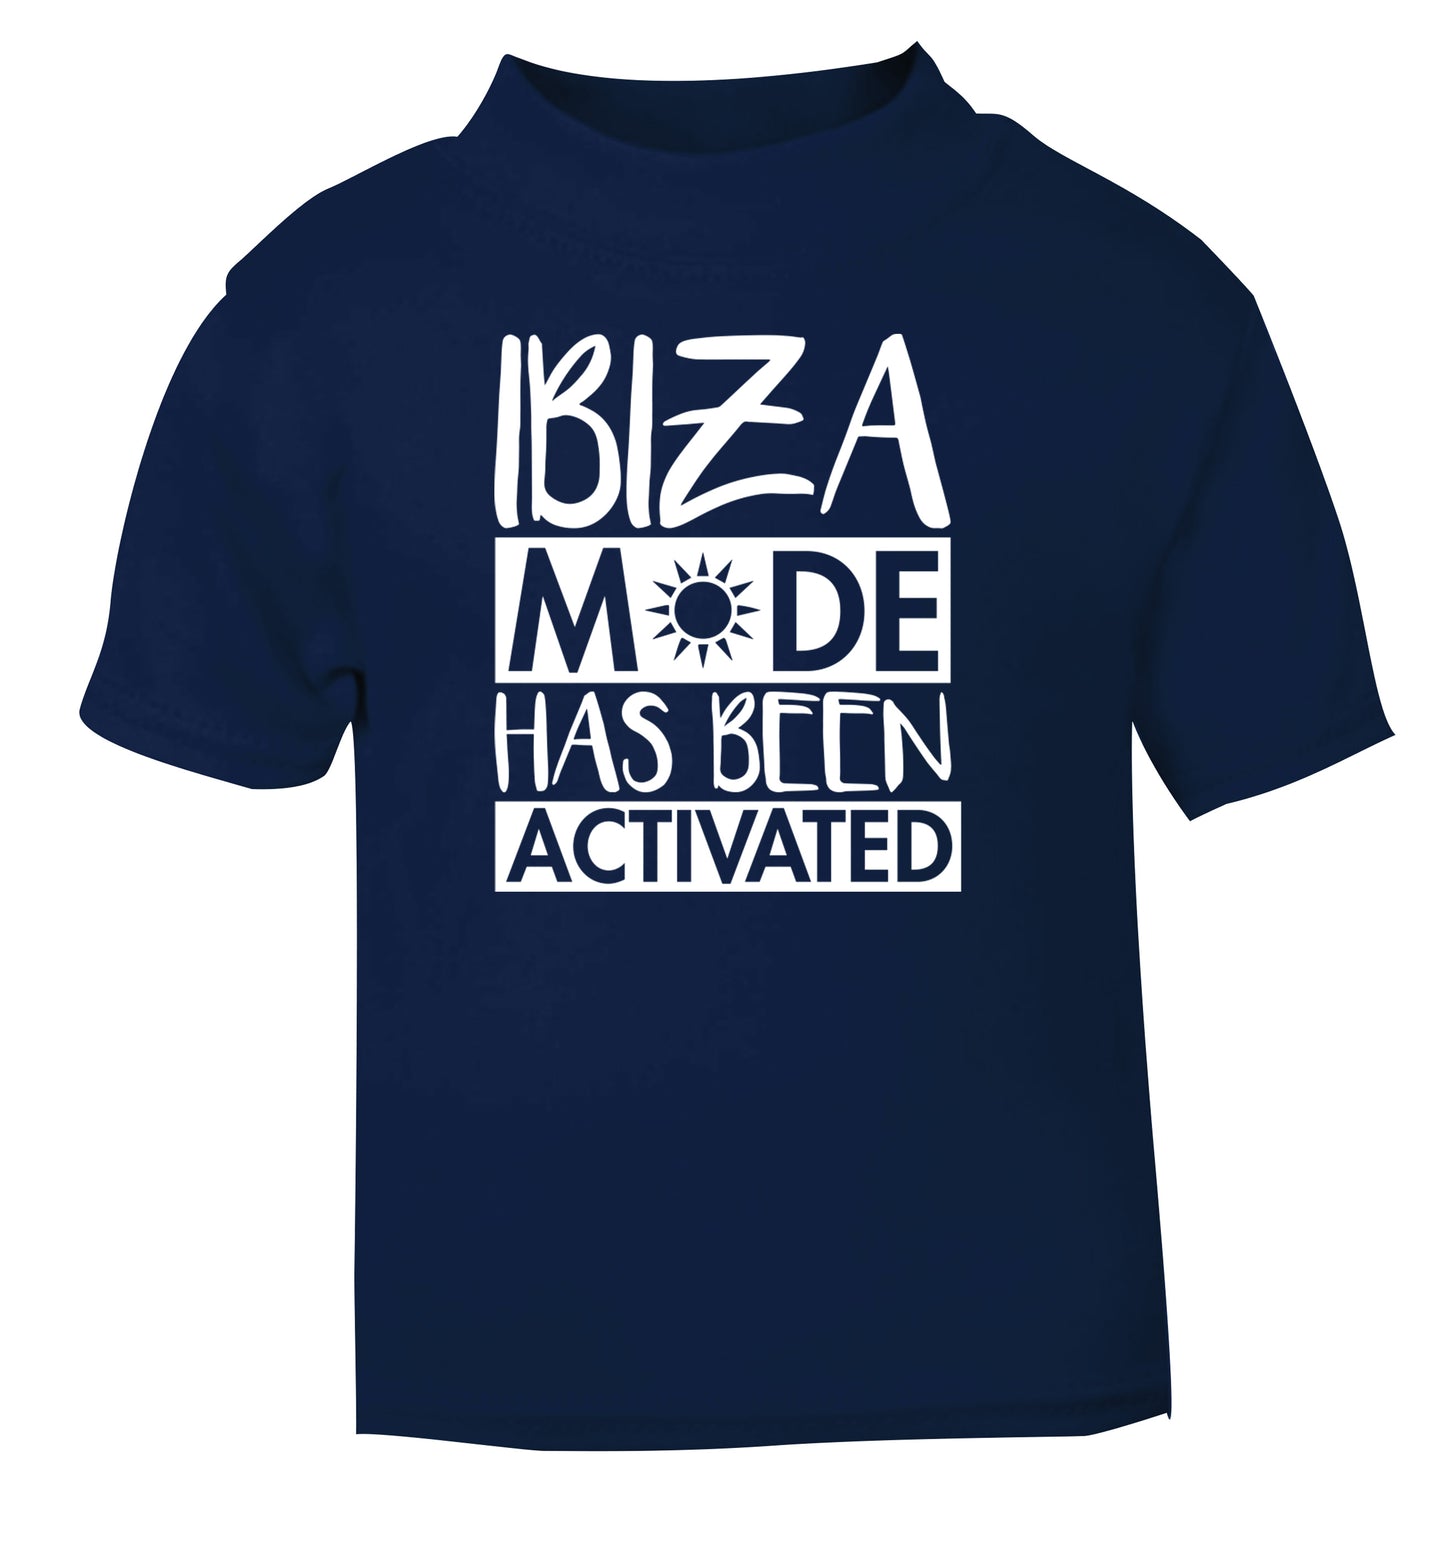 Ibiza mode has been activated navy Baby Toddler Tshirt 2 Years